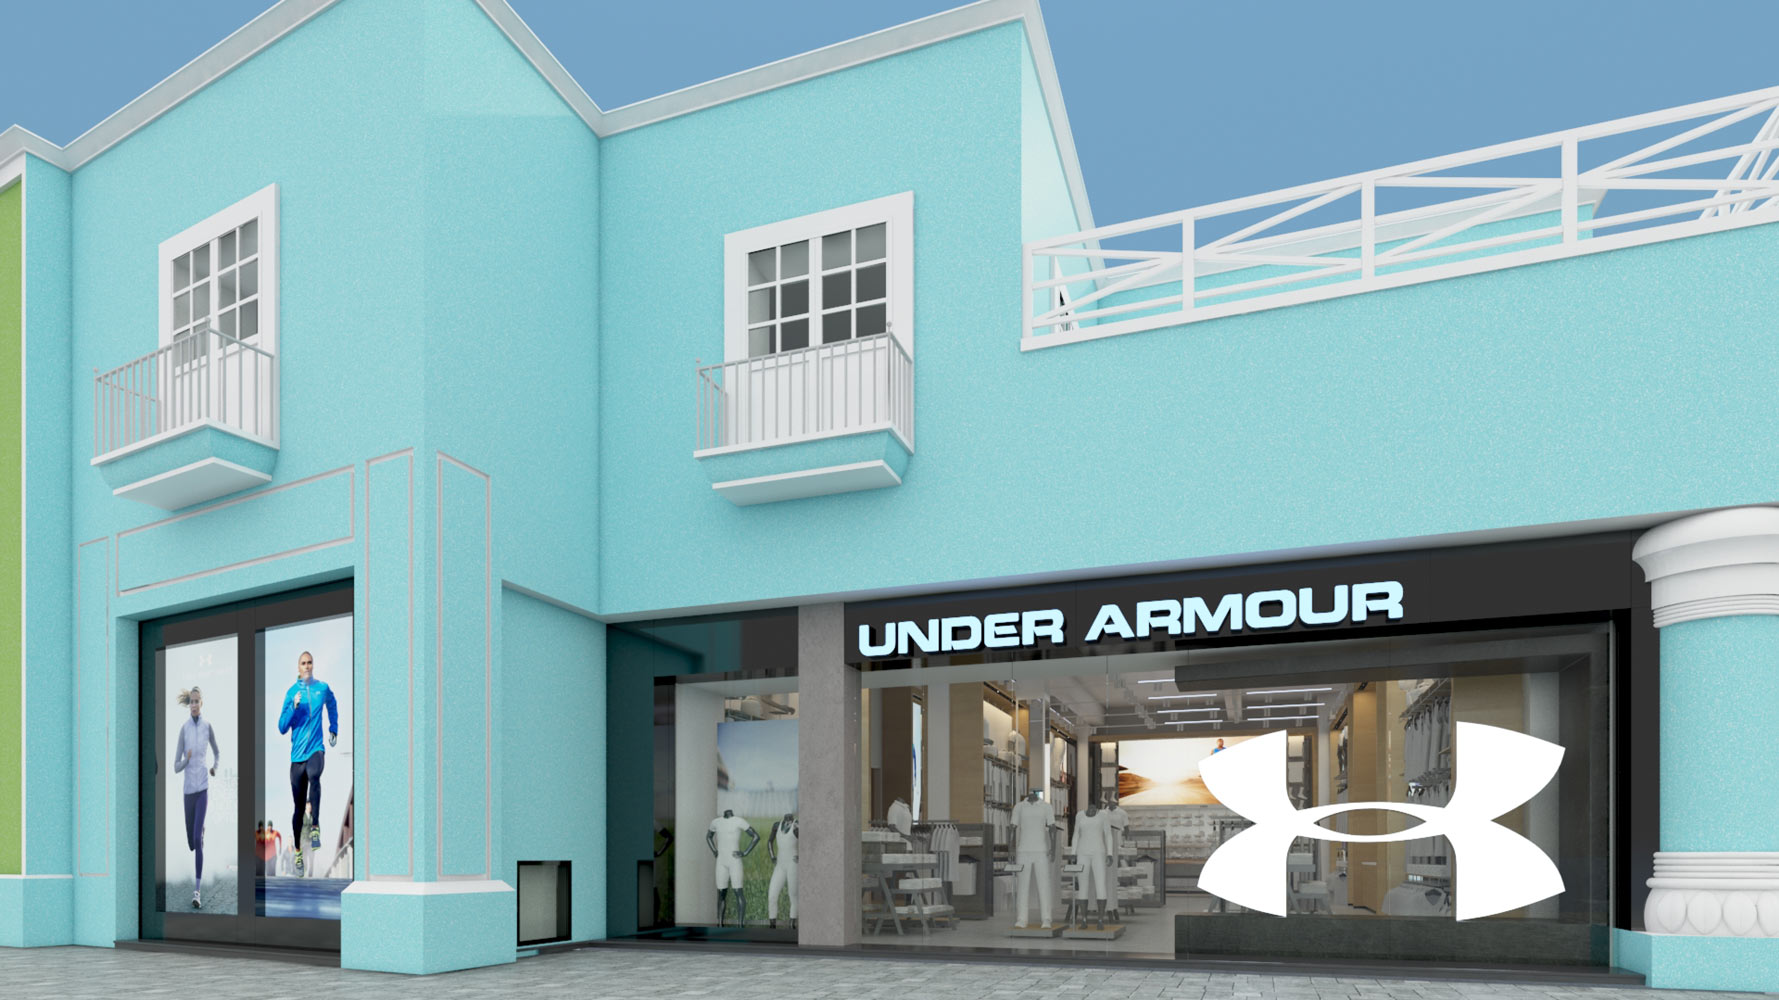 Under Armour - Architectural 3D Rendering